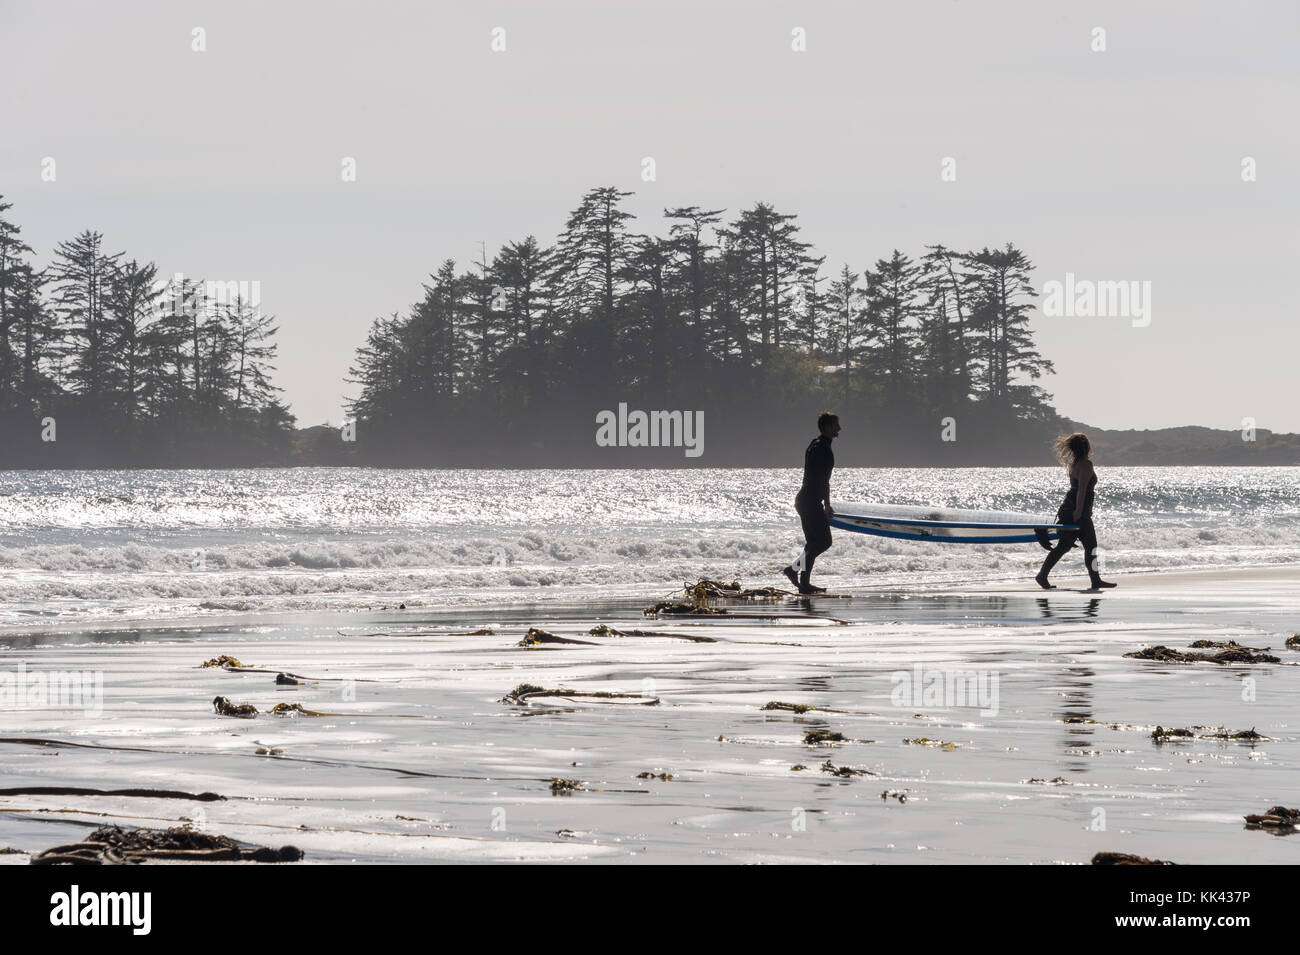 Chesterman beach near Tofino, BC, Canada (September 2017) - Two people holding a surfind board Stock Photo